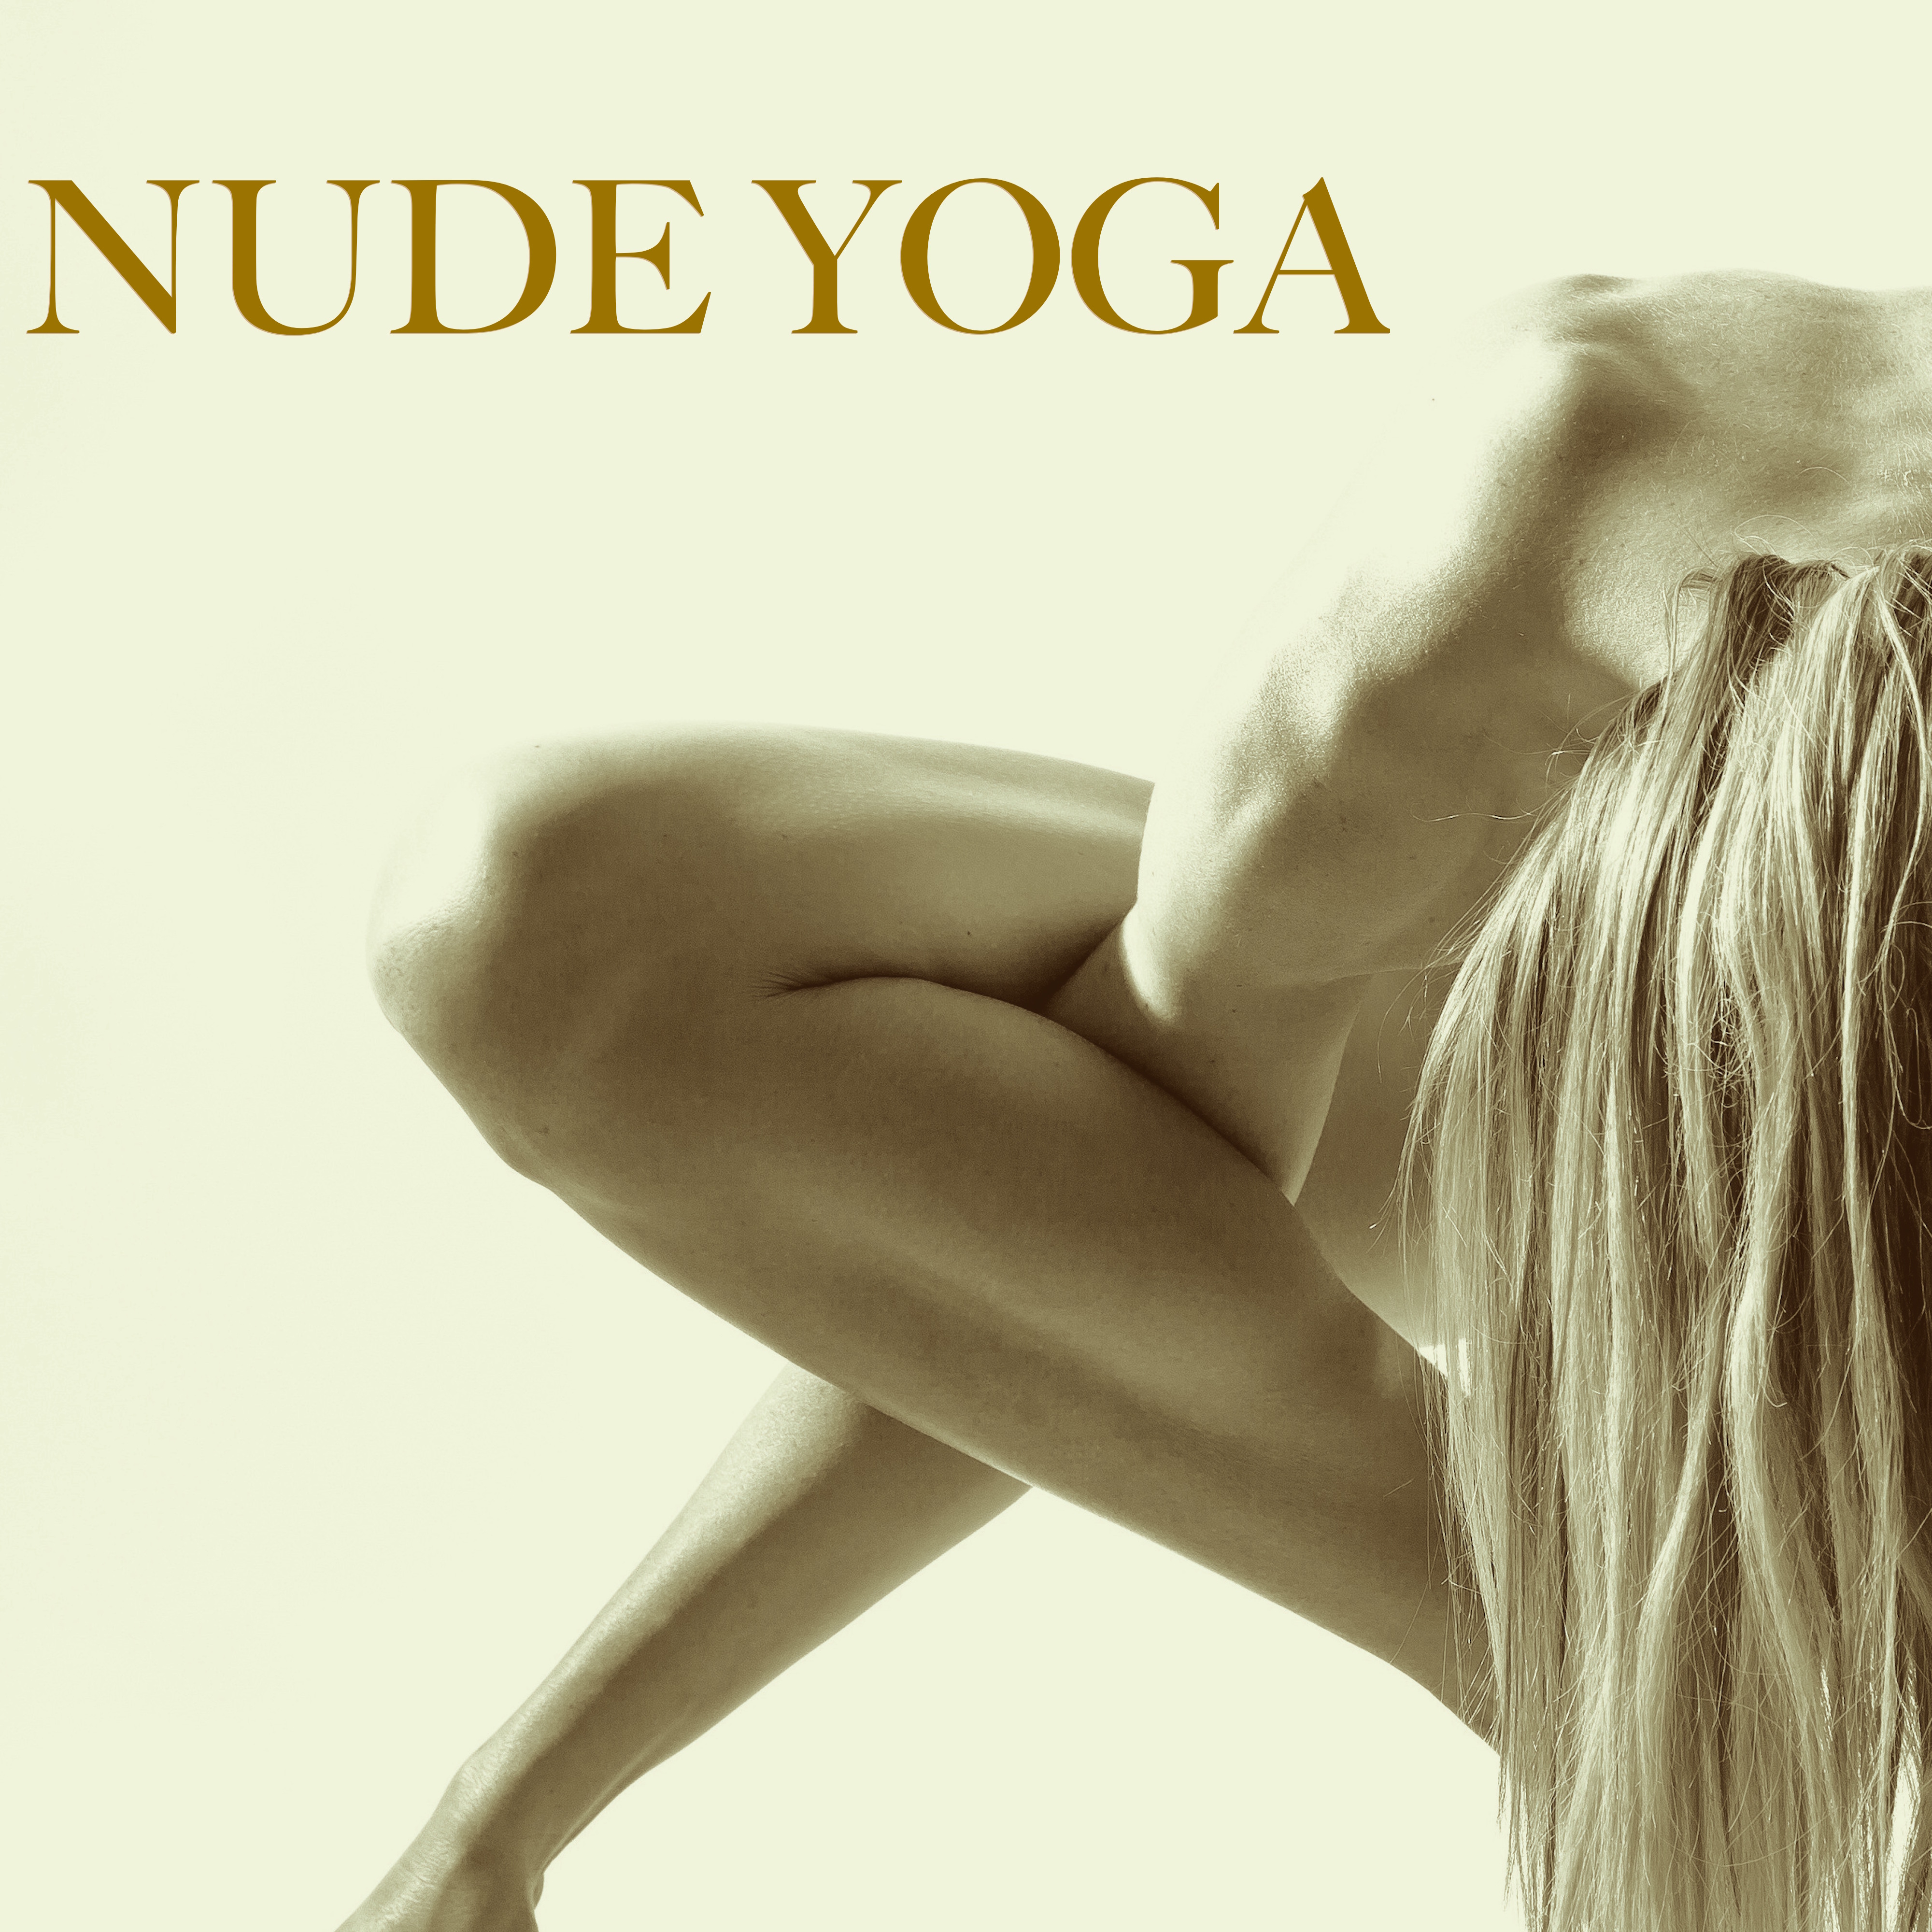 Nude Yoga: Best Playlist for Naked Yoga Class - Meditation & Hot Yoga Positions with 45 Sensual Songs